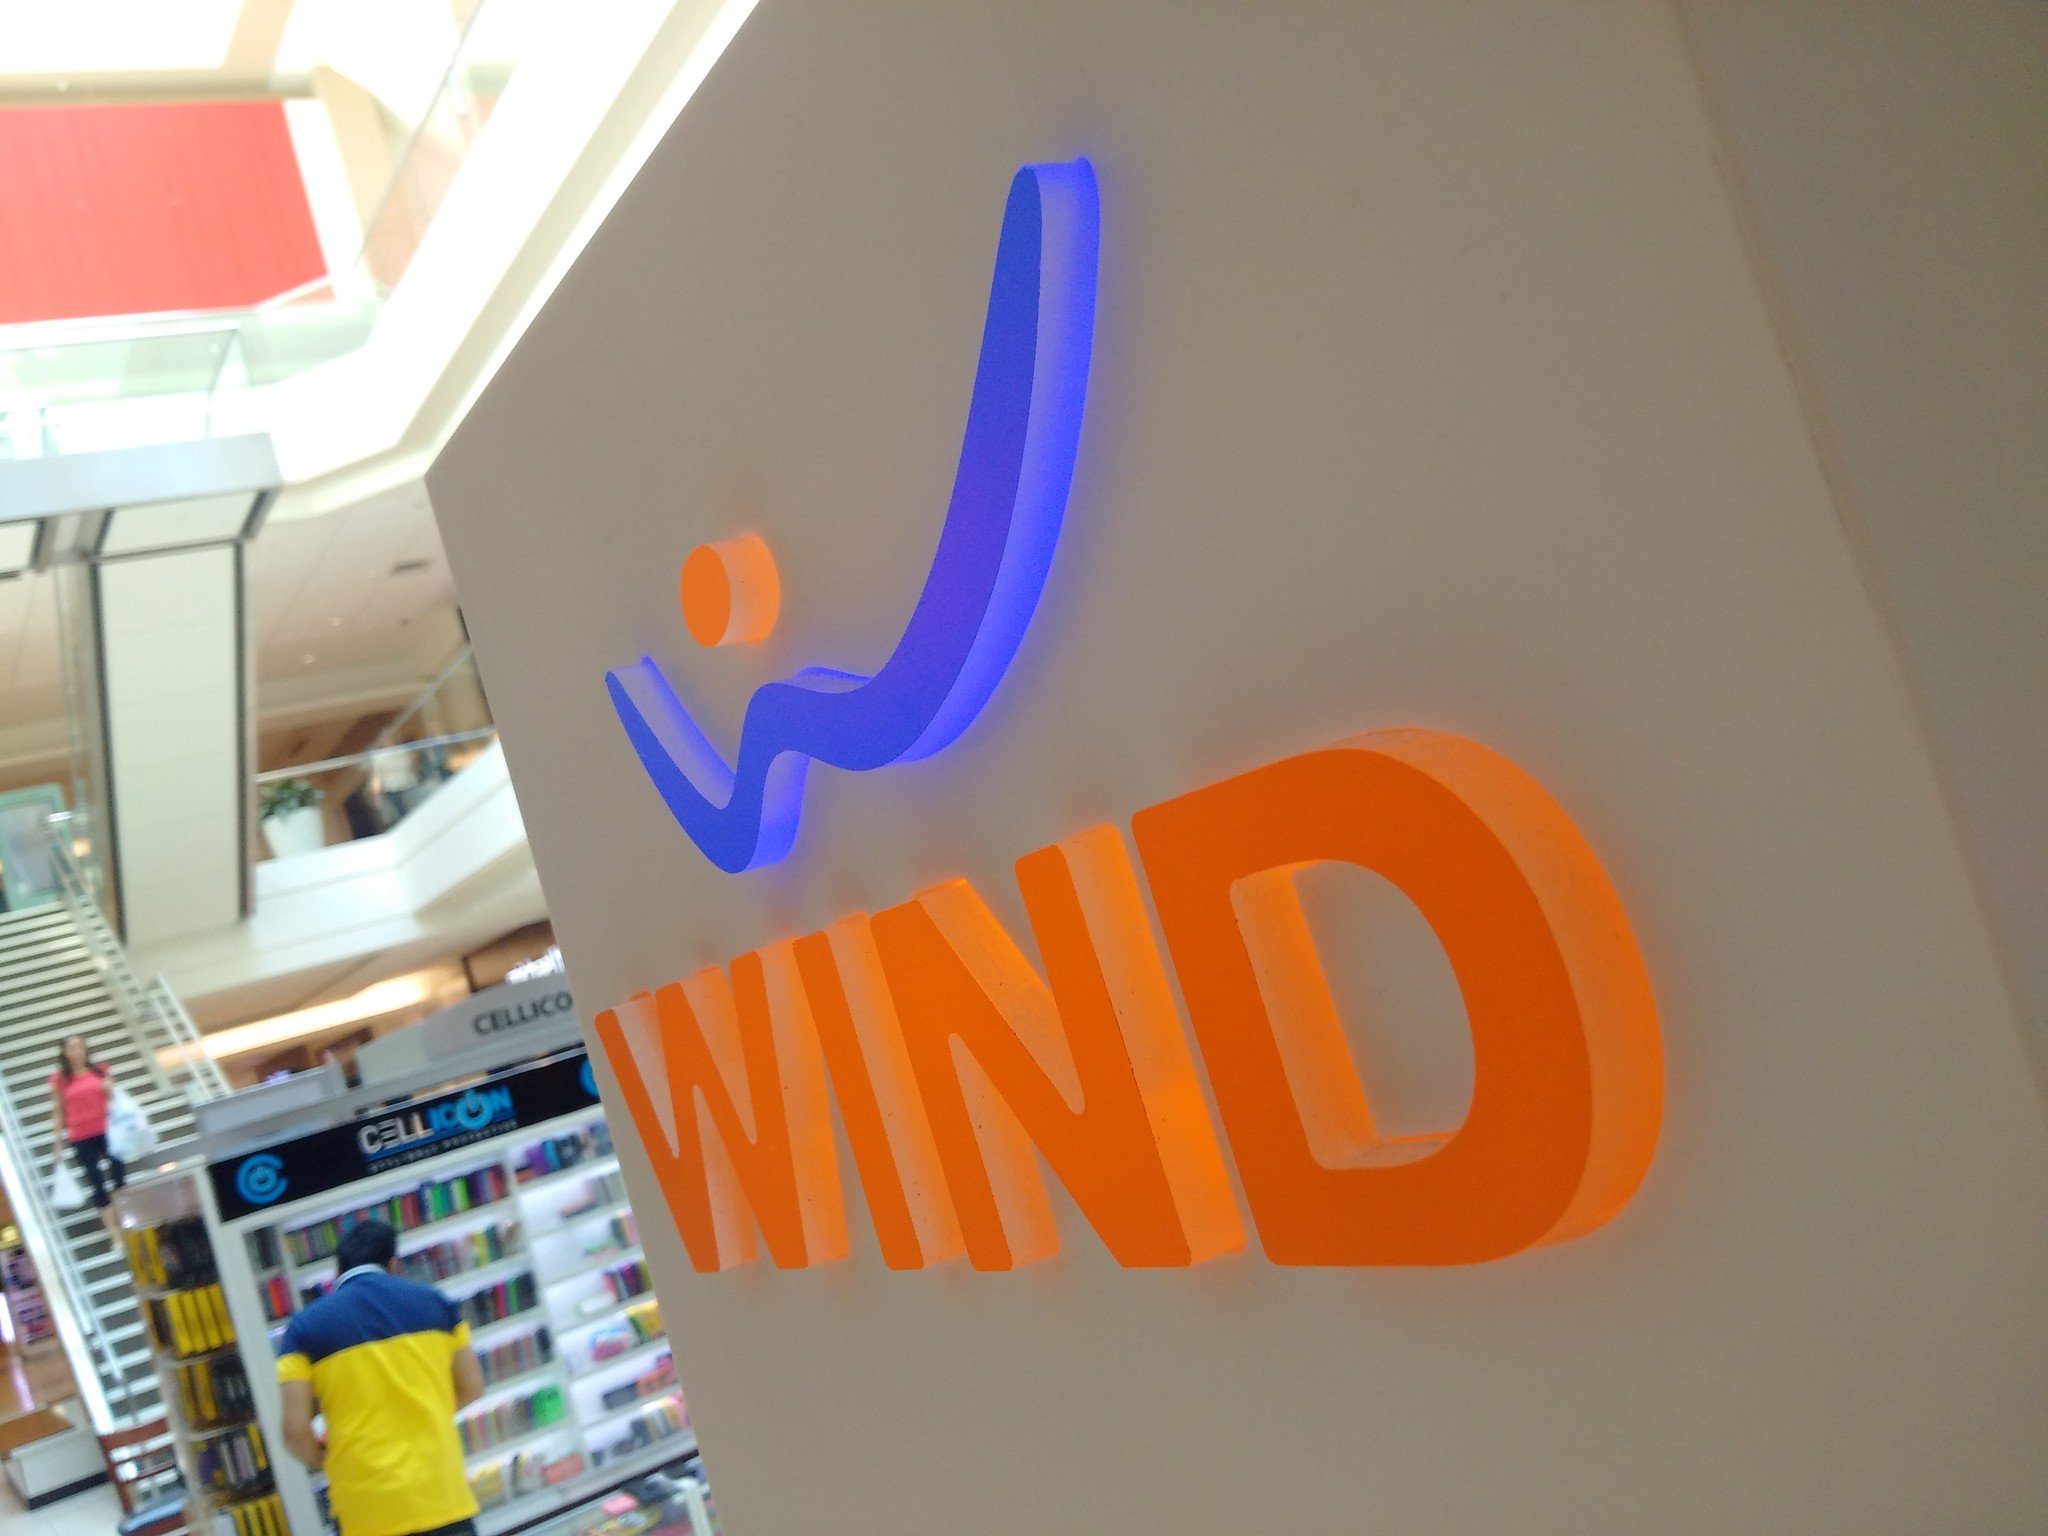 What services does WindMobile offer?